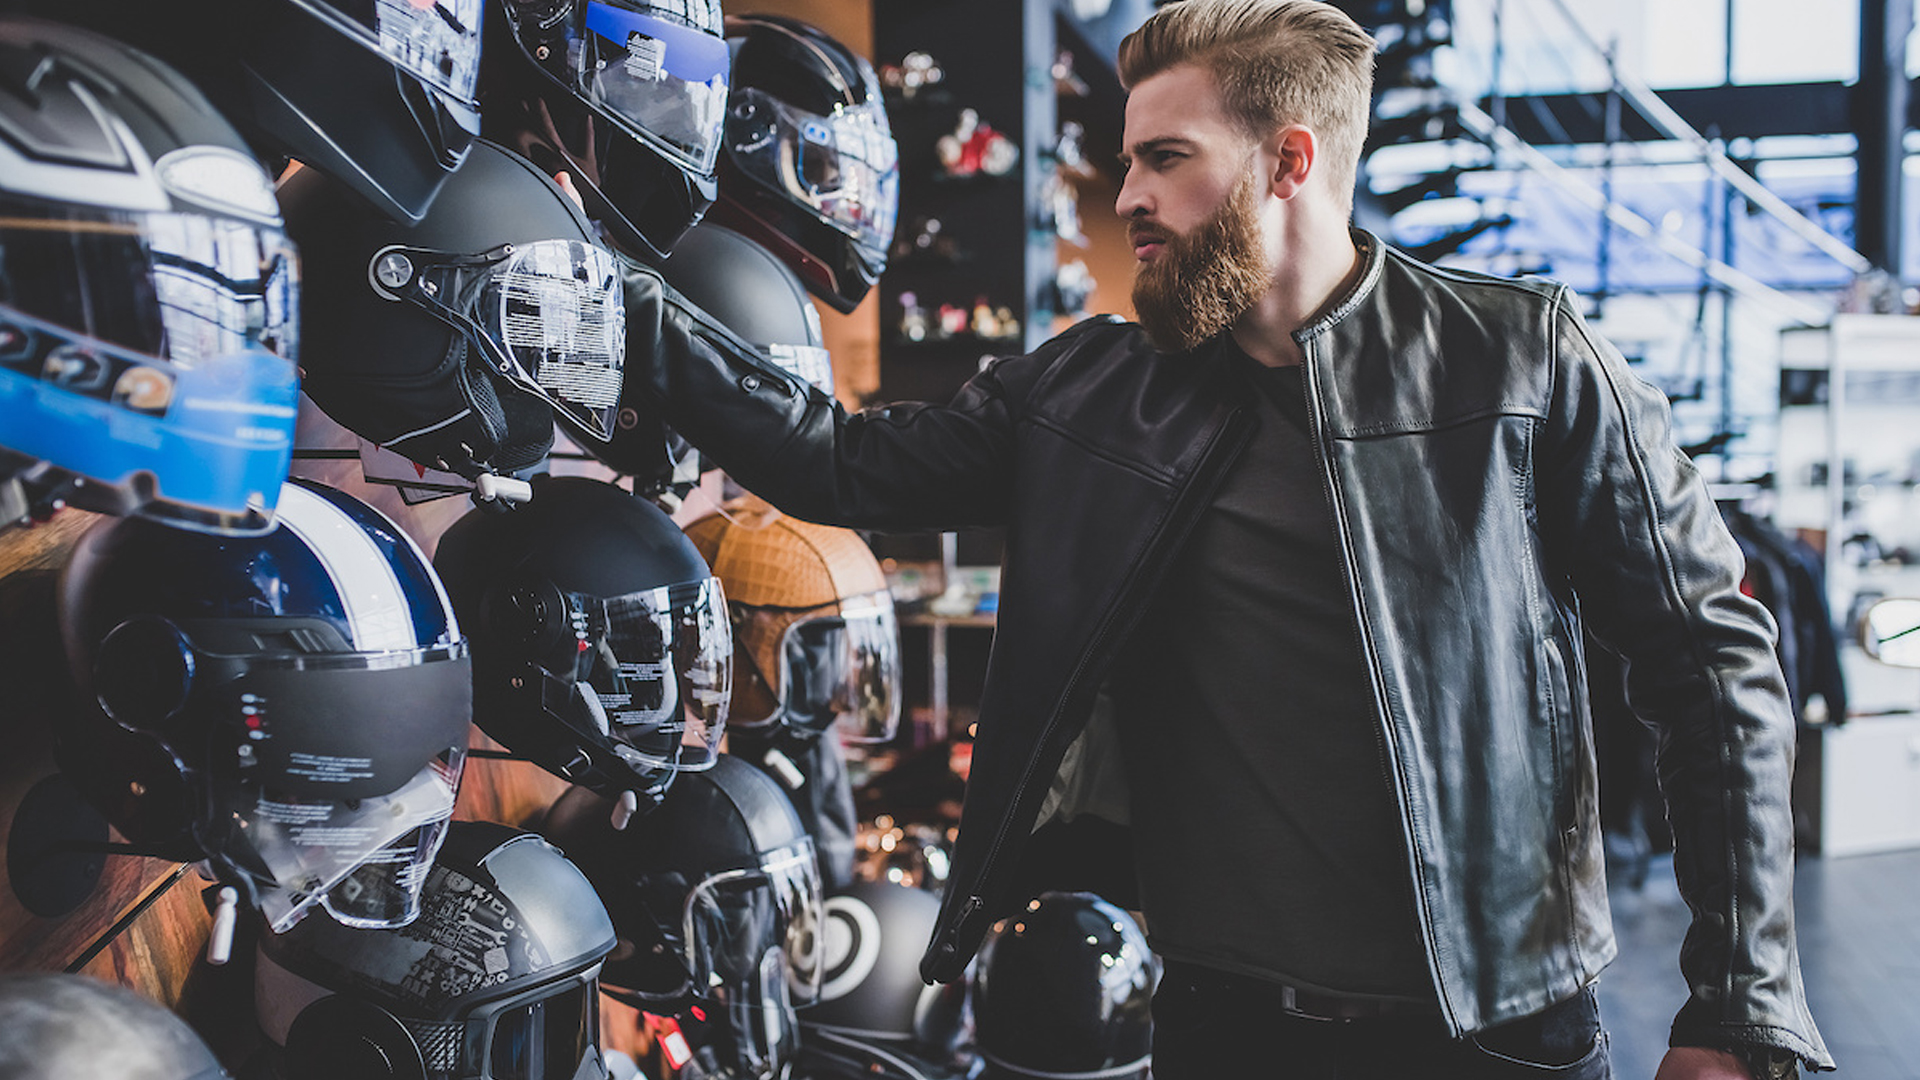 Bearded young man at motorcycle shop looking to purchase a new motorcycle helmet.